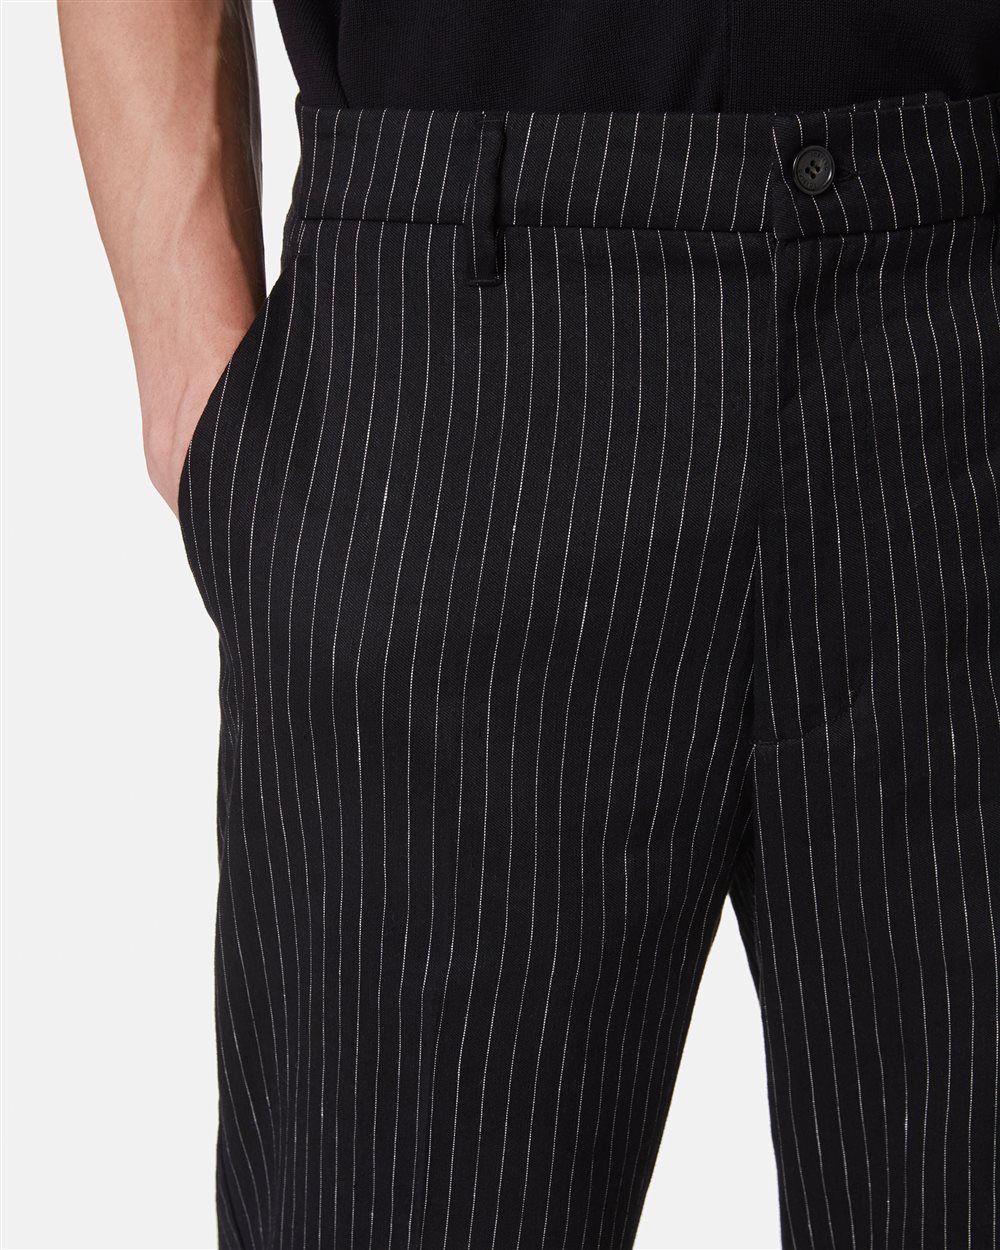 Pinstripe chinos pants - Iceberg - Official Website